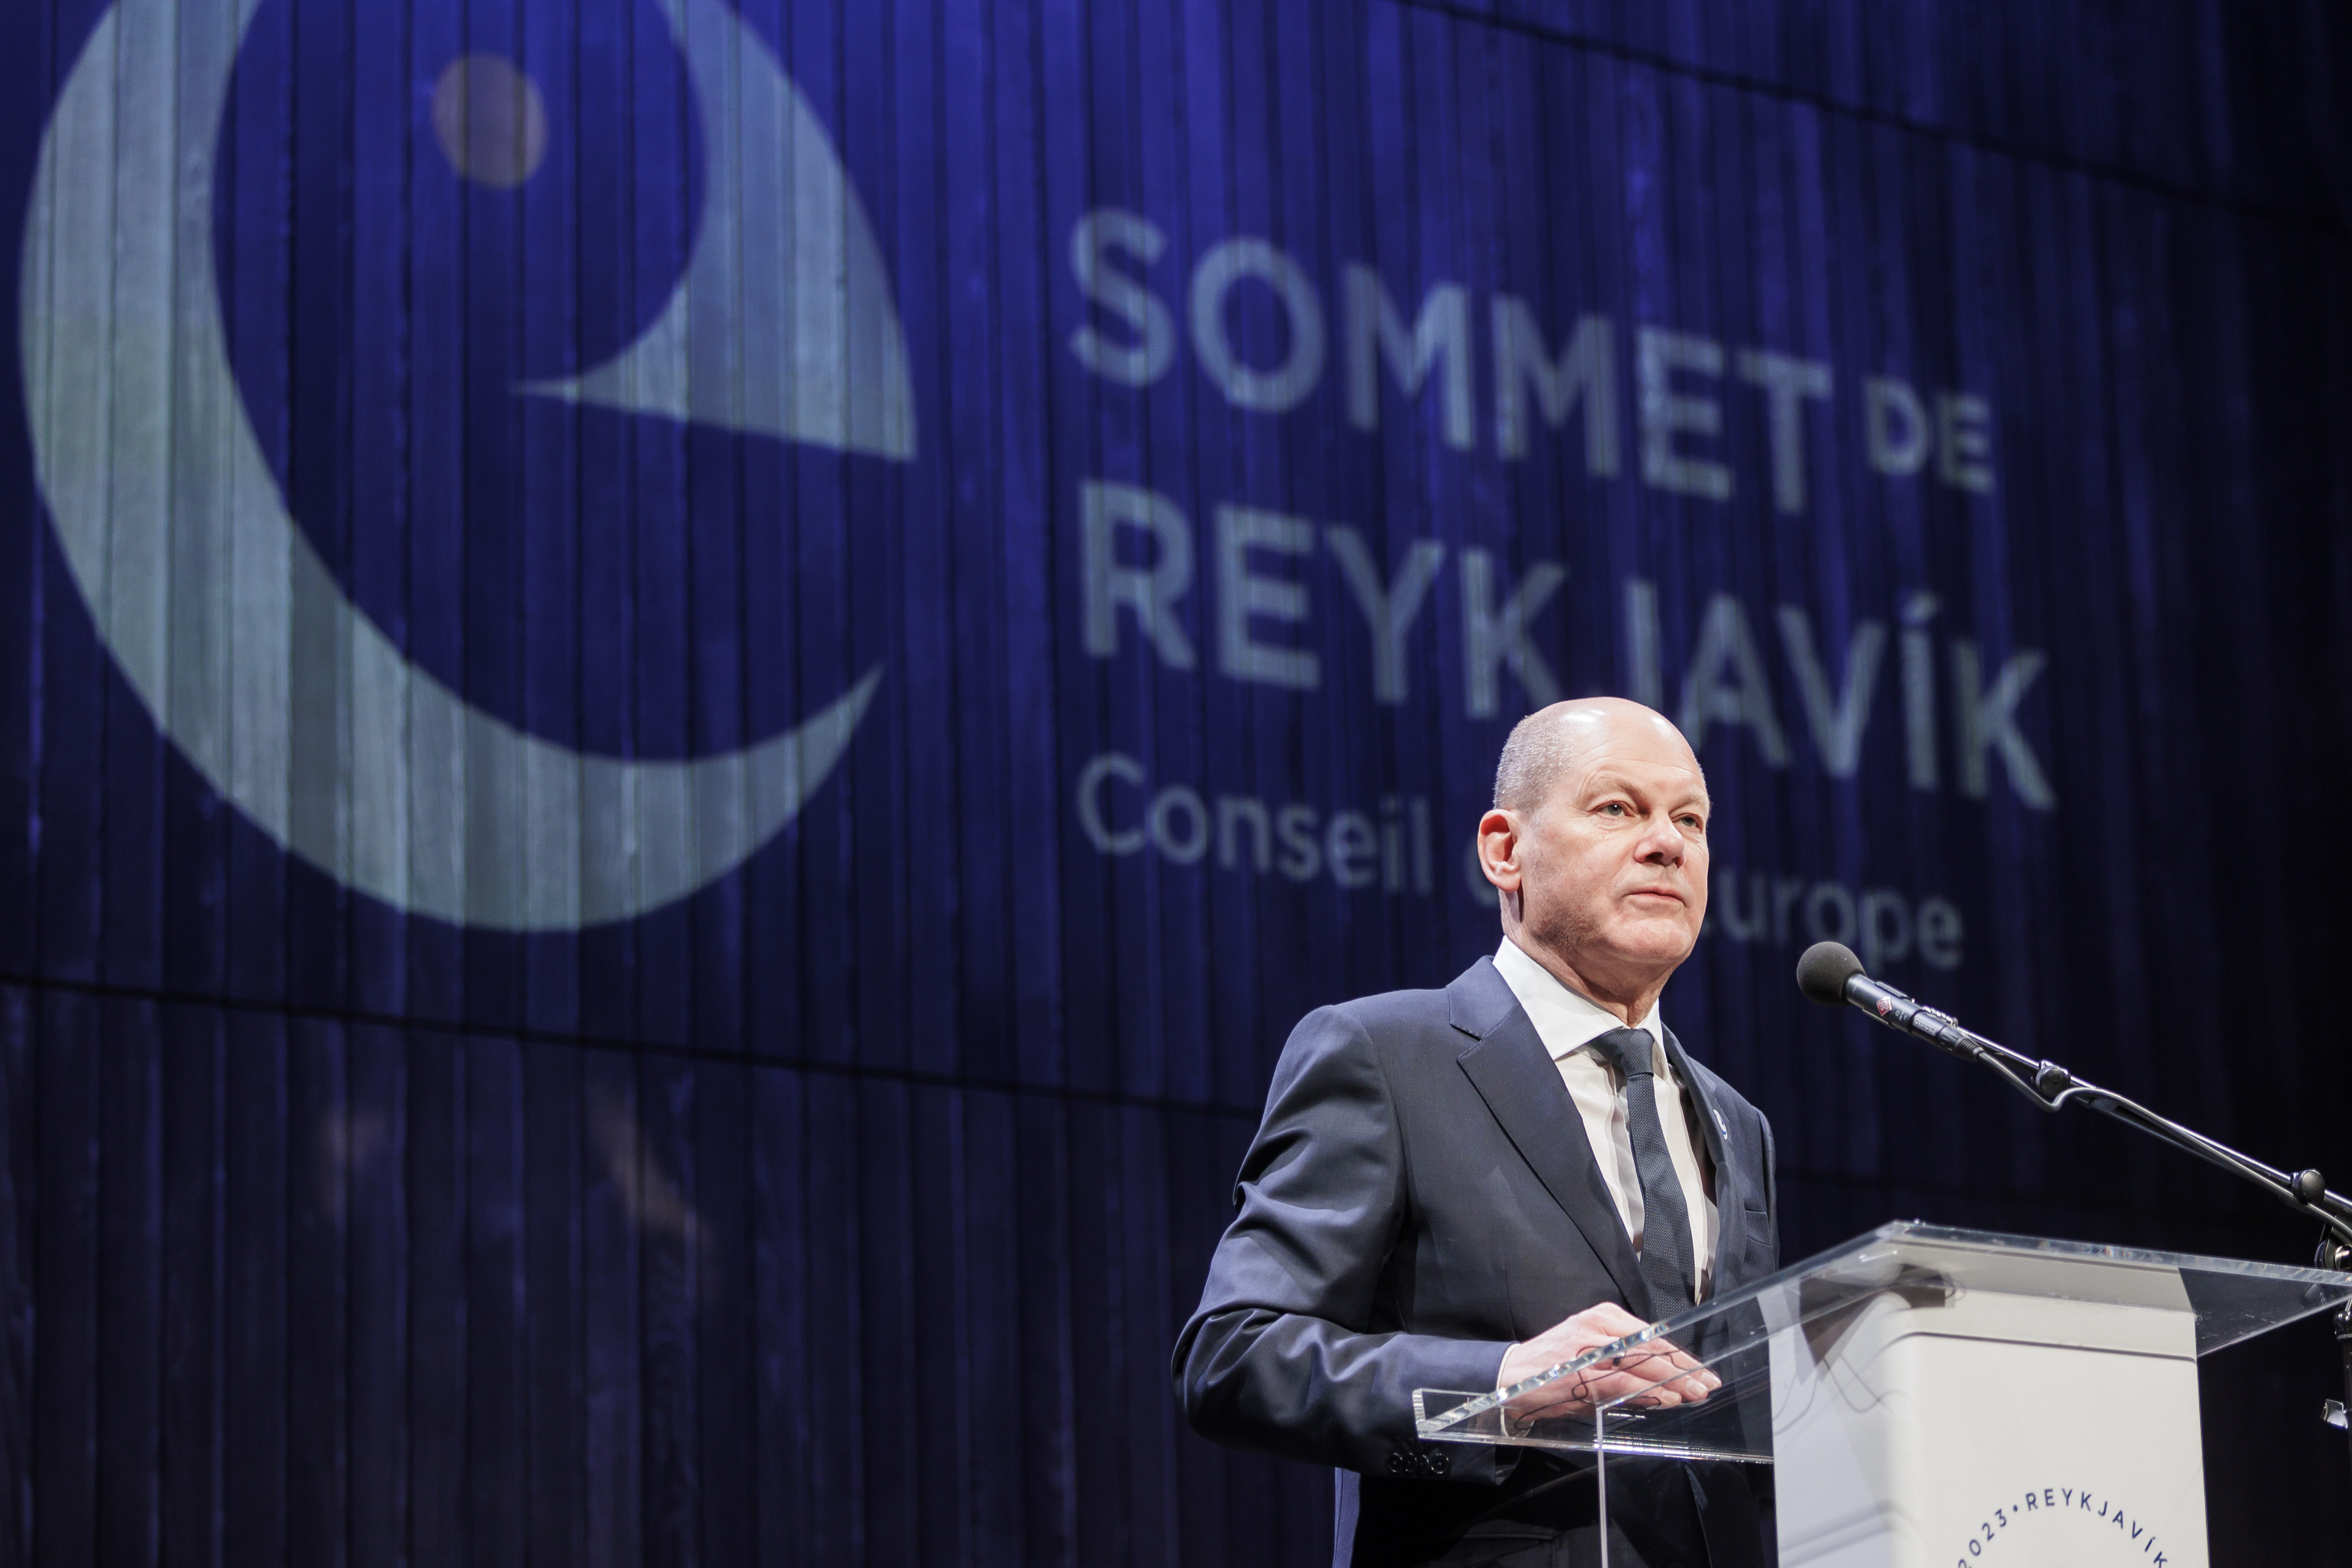 Federal Chancellor Scholz delivering a speech at the Council of Europe Summit.